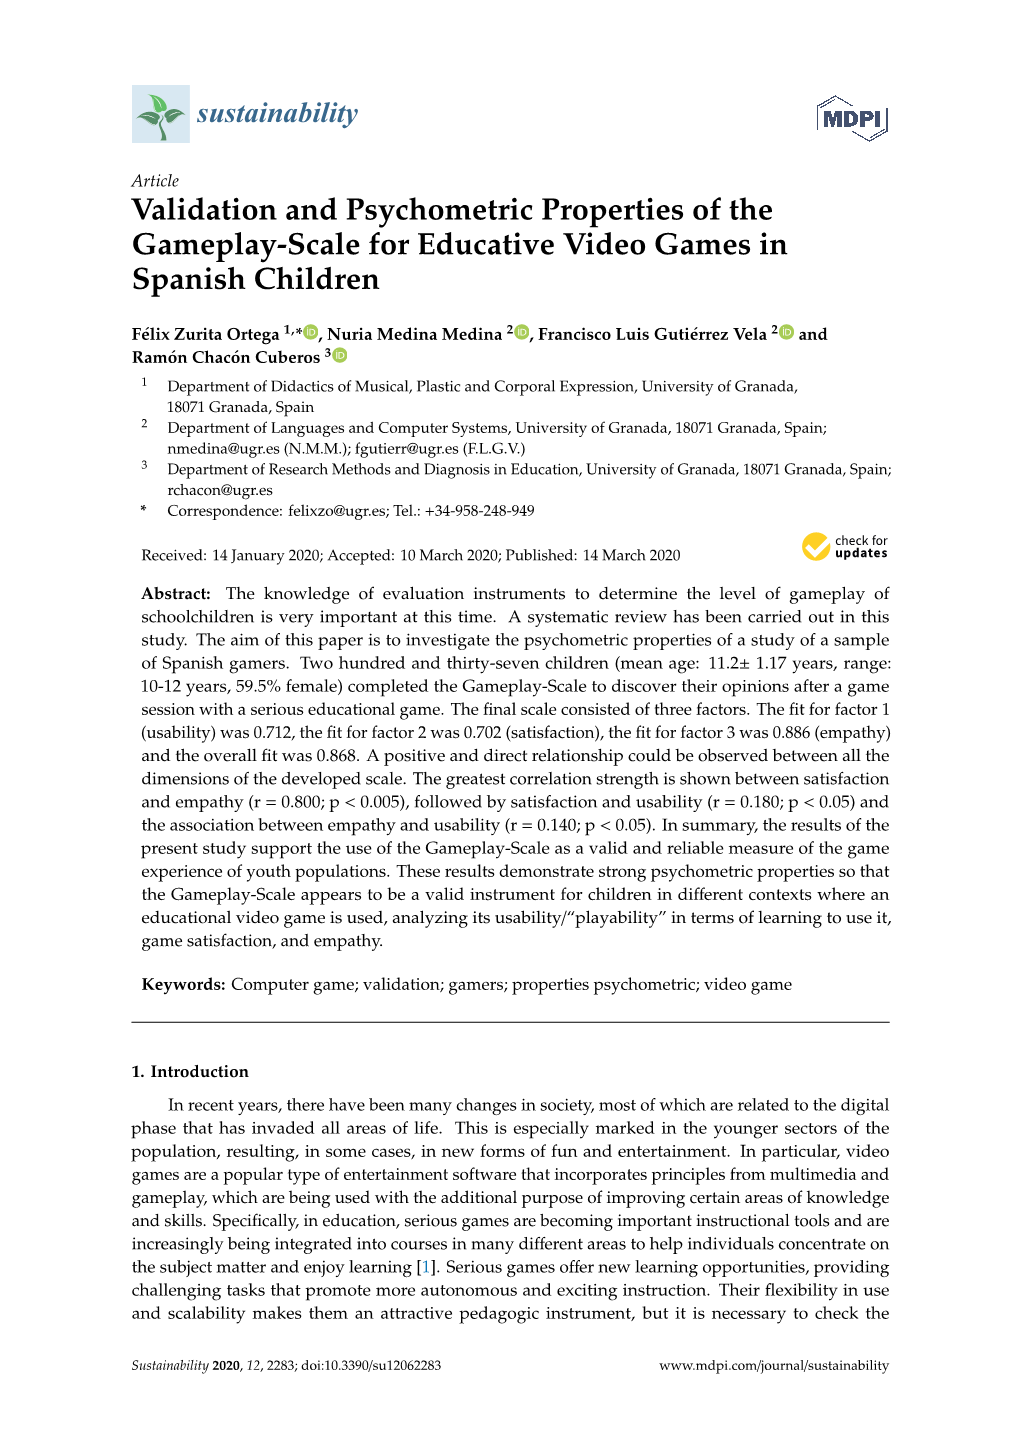 Validation and Psychometric Properties of the Gameplay-Scale for Educative Video Games in Spanish Children